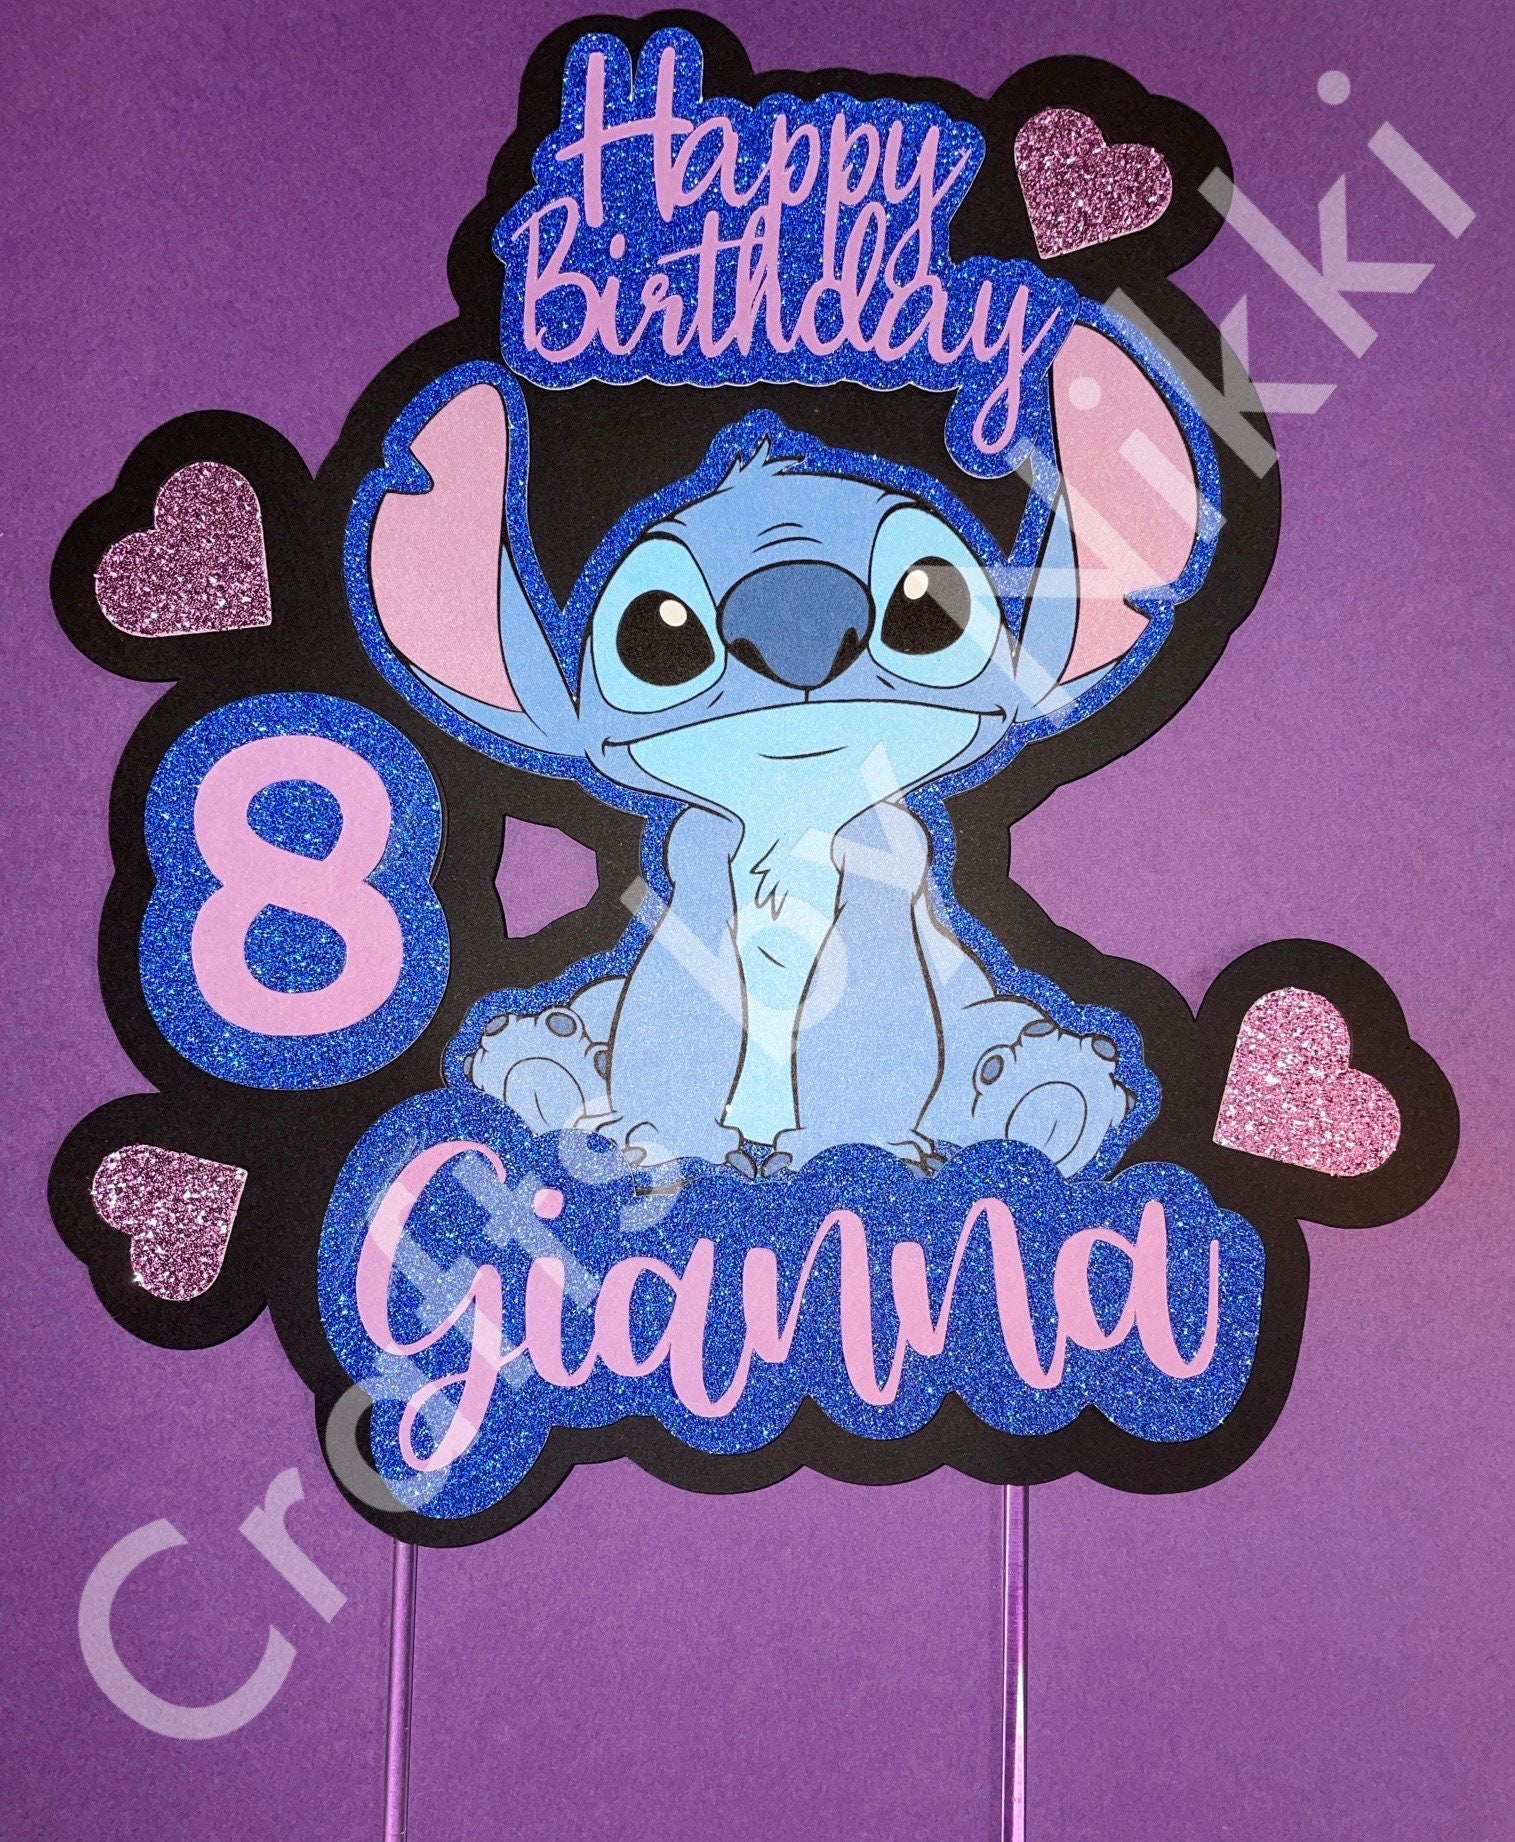 Lilo and Stitch Tye Dye Background Edible Cake Topper Image ABPID57500 – A  Birthday Place